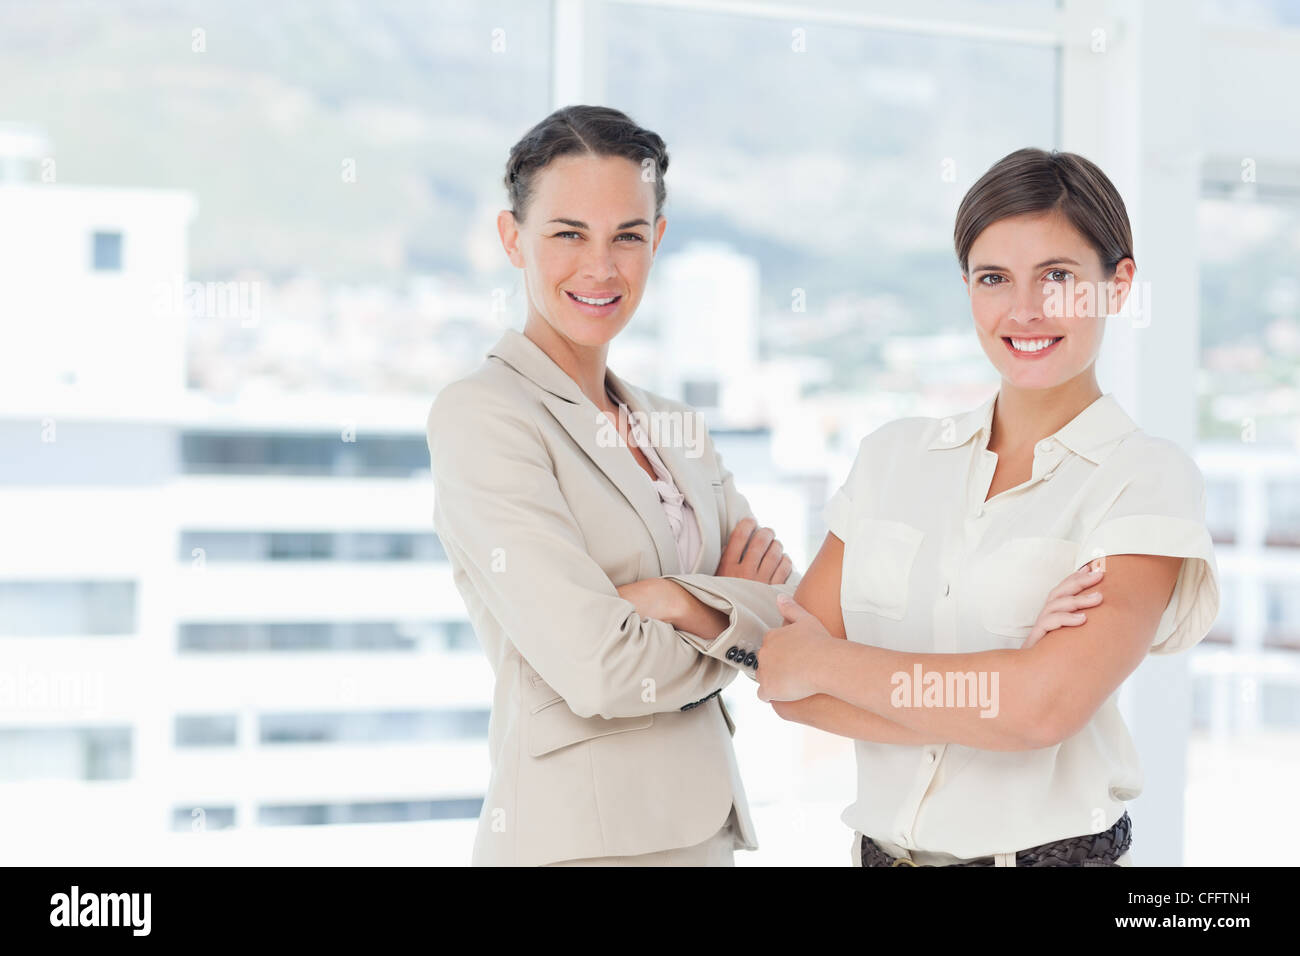 Smiling businesswomen with their arms folded Stock Photo